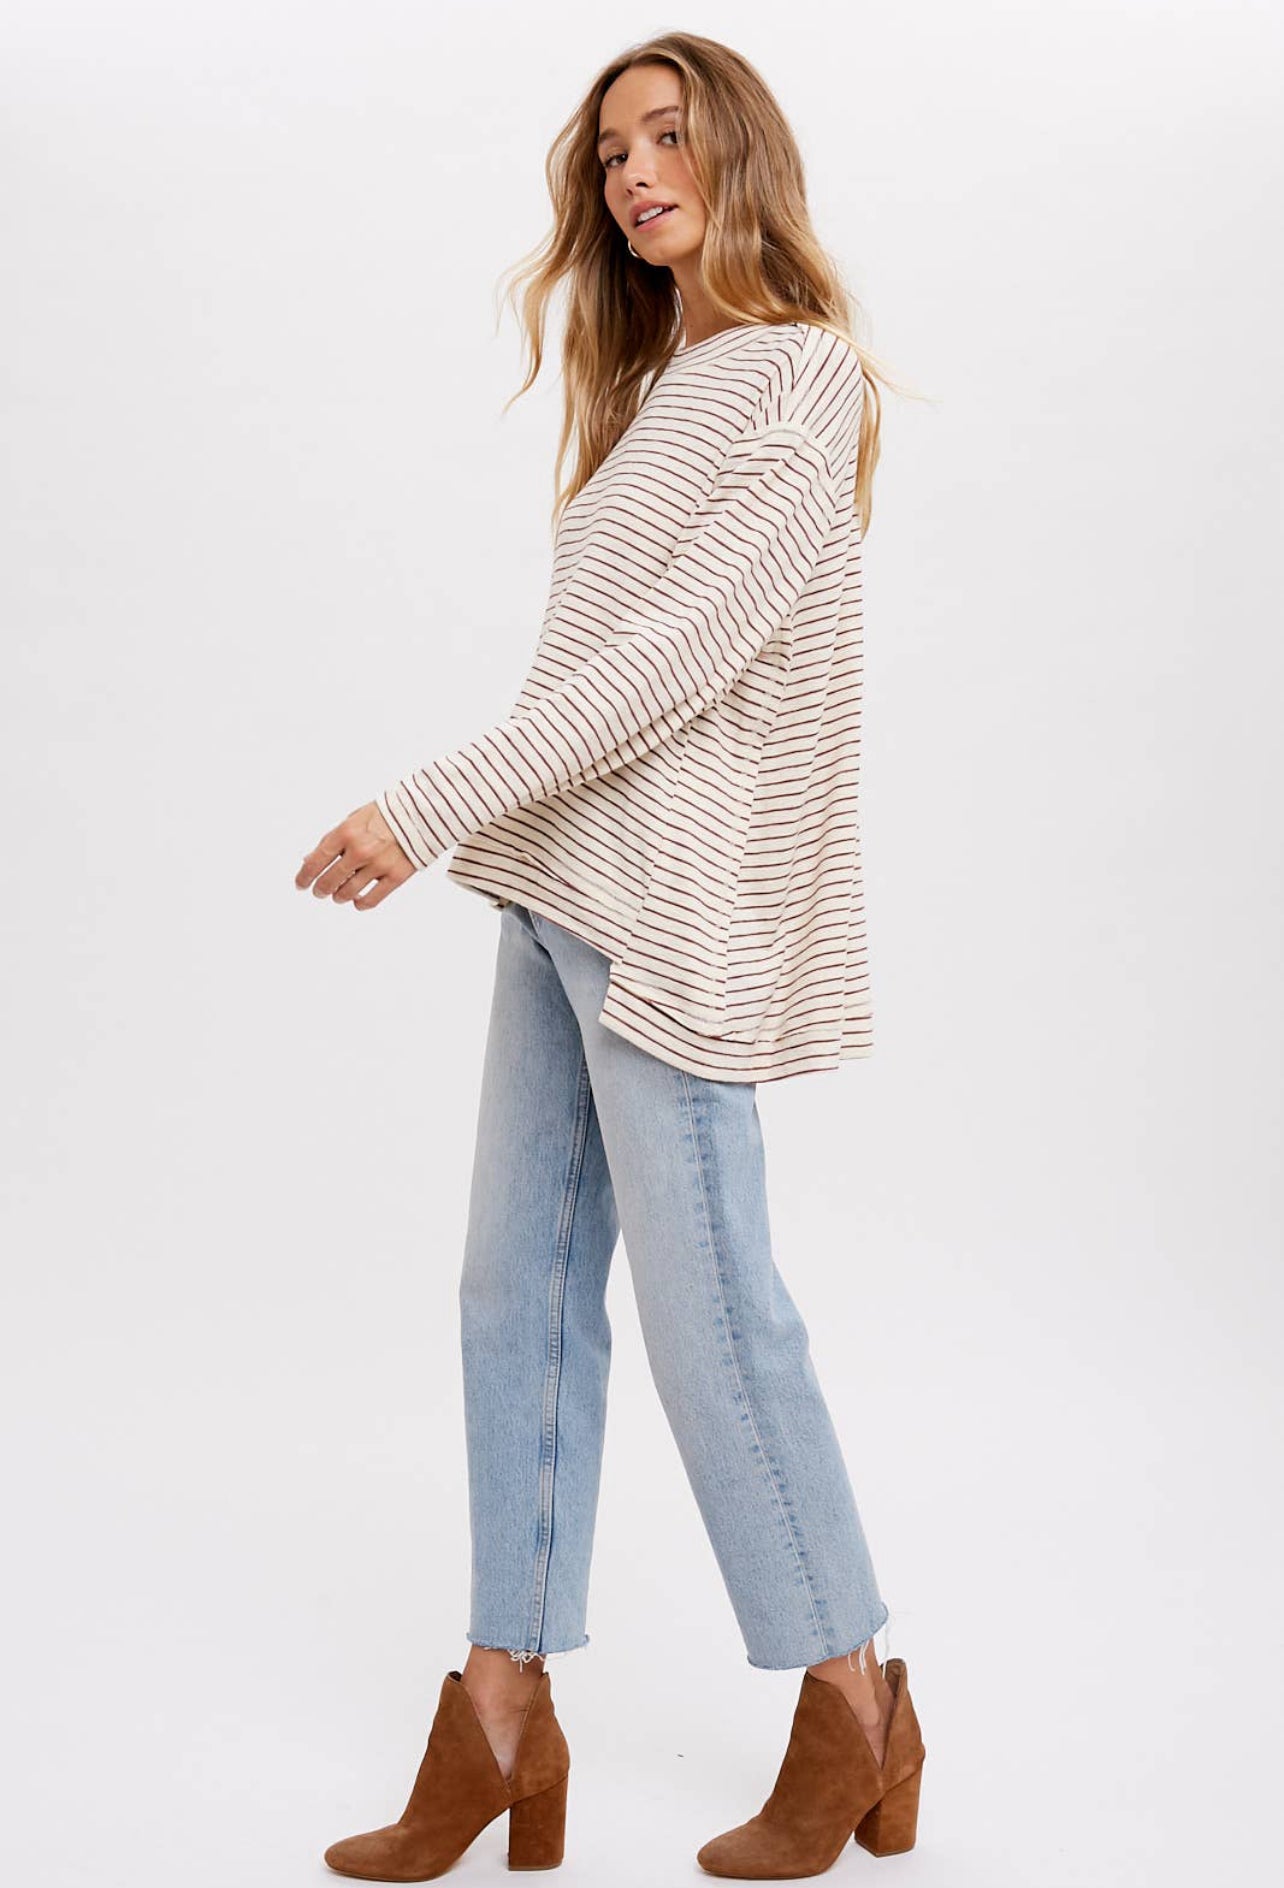 Slouchy Stripe Top- Oatmeal and Maroon